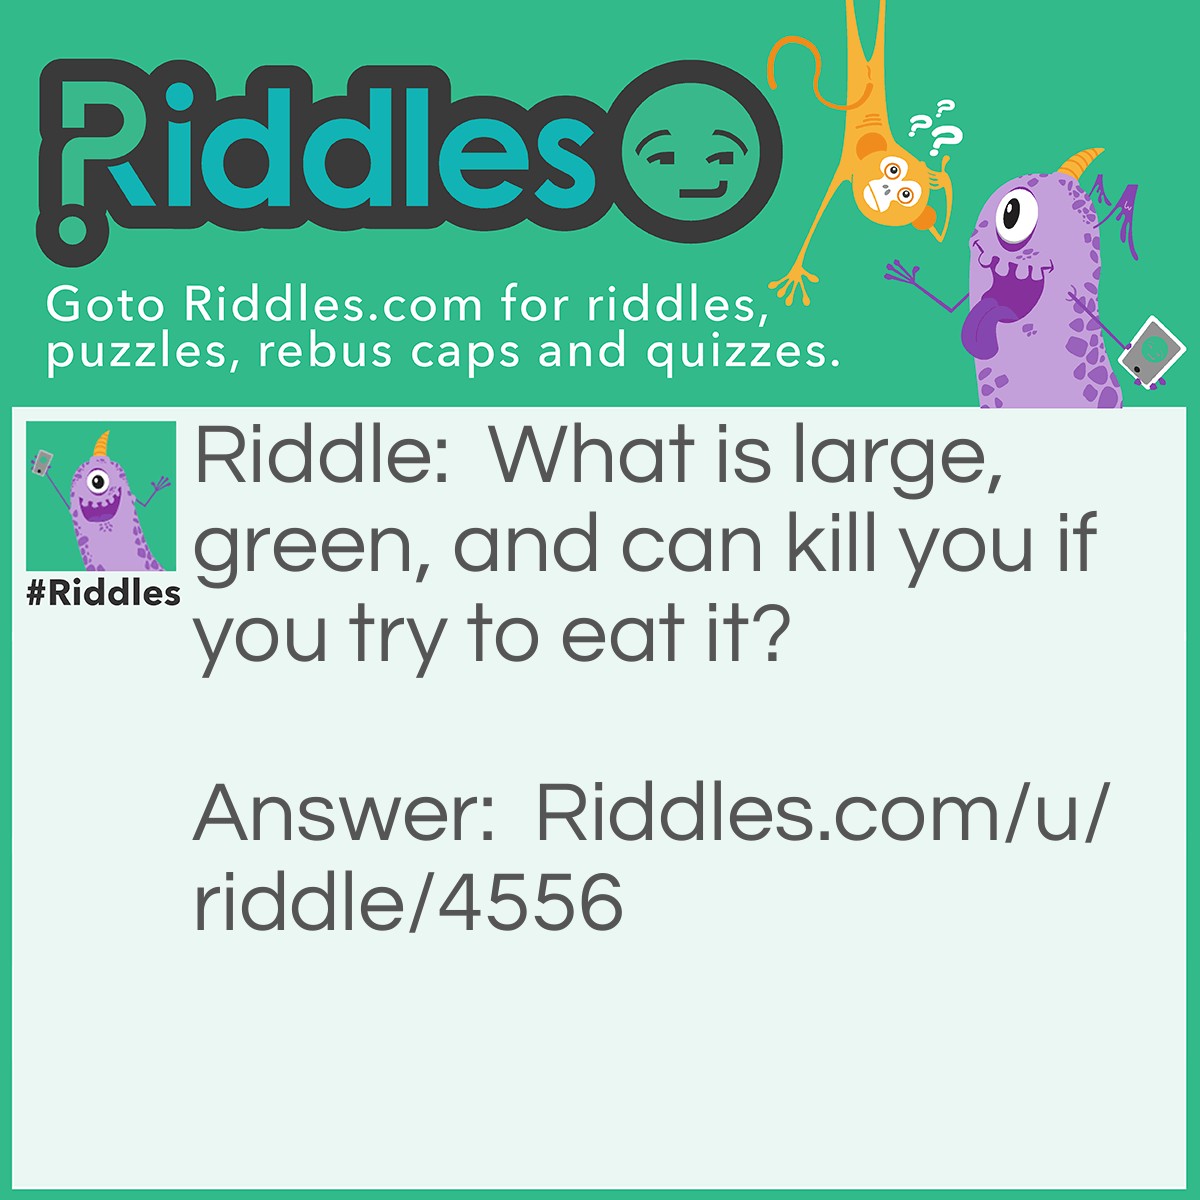 Riddle: What is large, green, and can kill you if you try to eat it? Answer: A tractor.